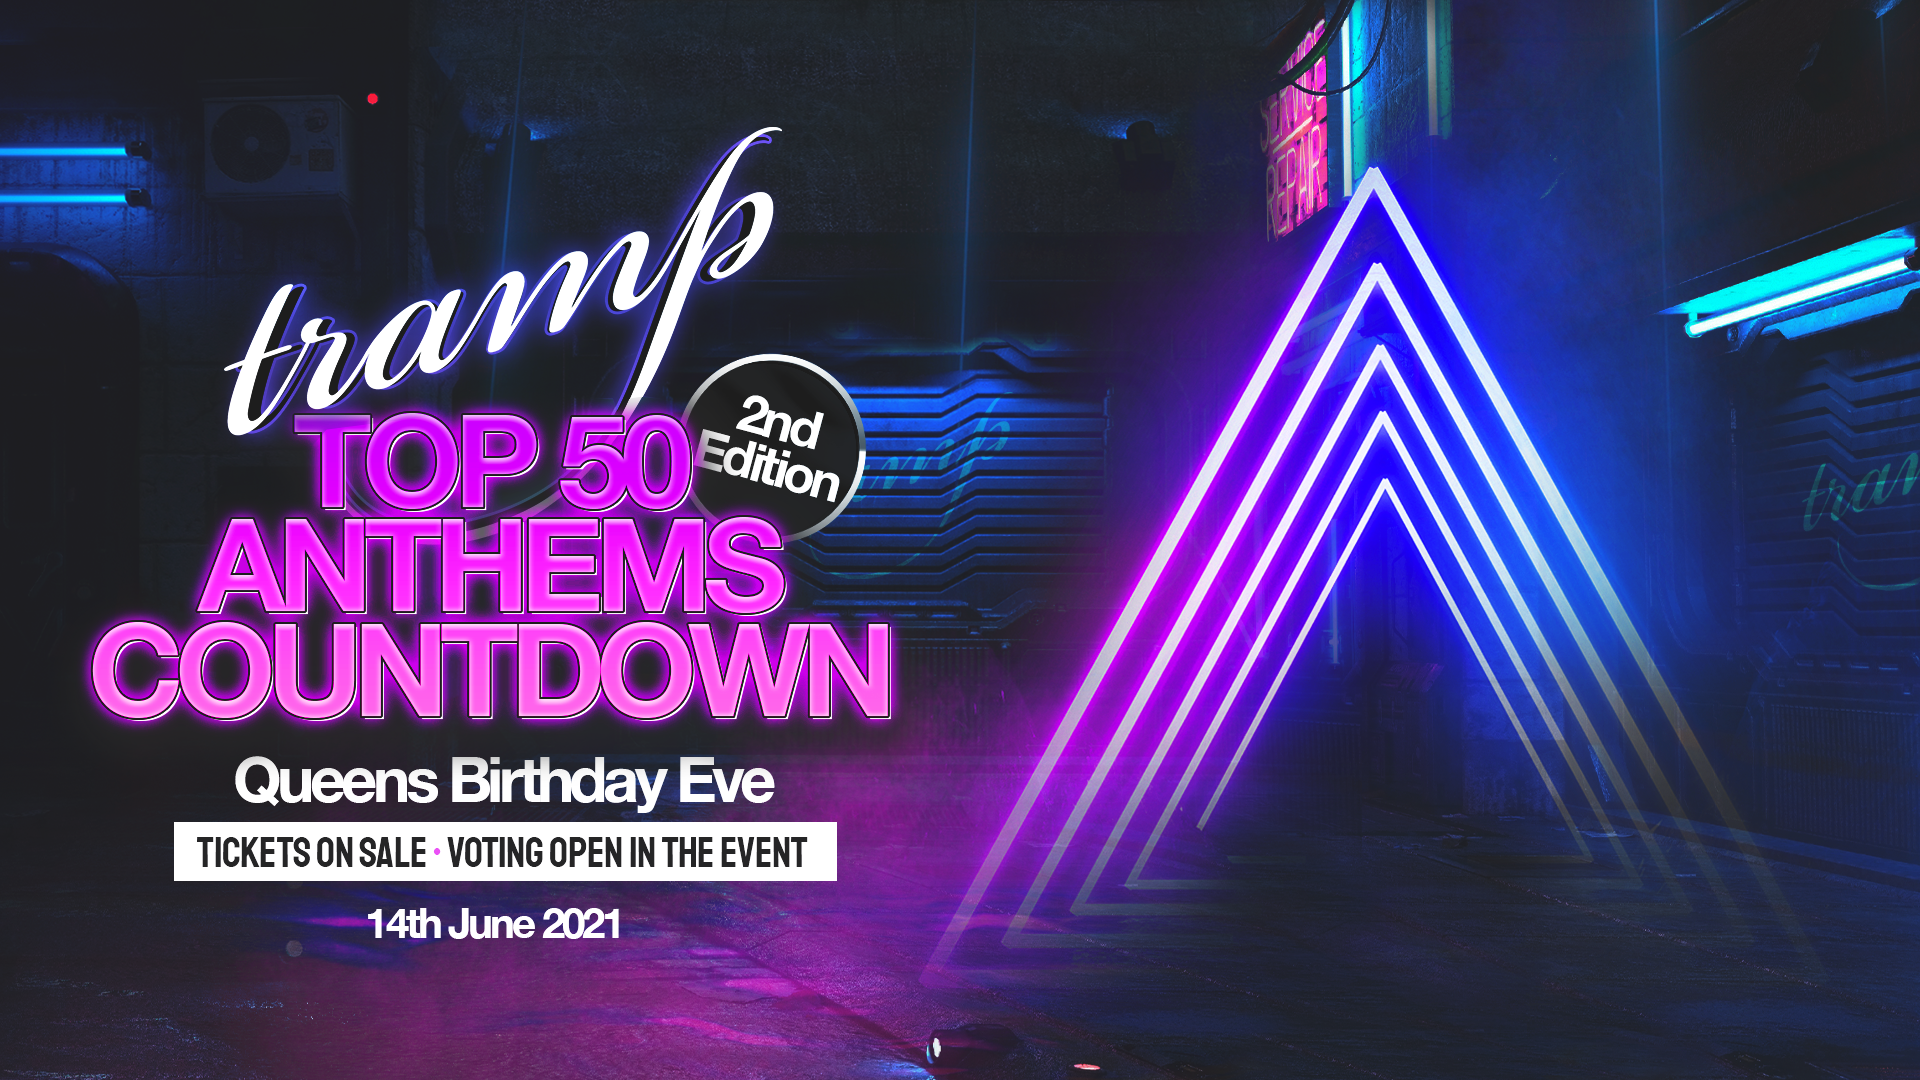 Tramp Top 50 Countdown Queens Birthday Eve New Date 23rd July 23 Jul 21